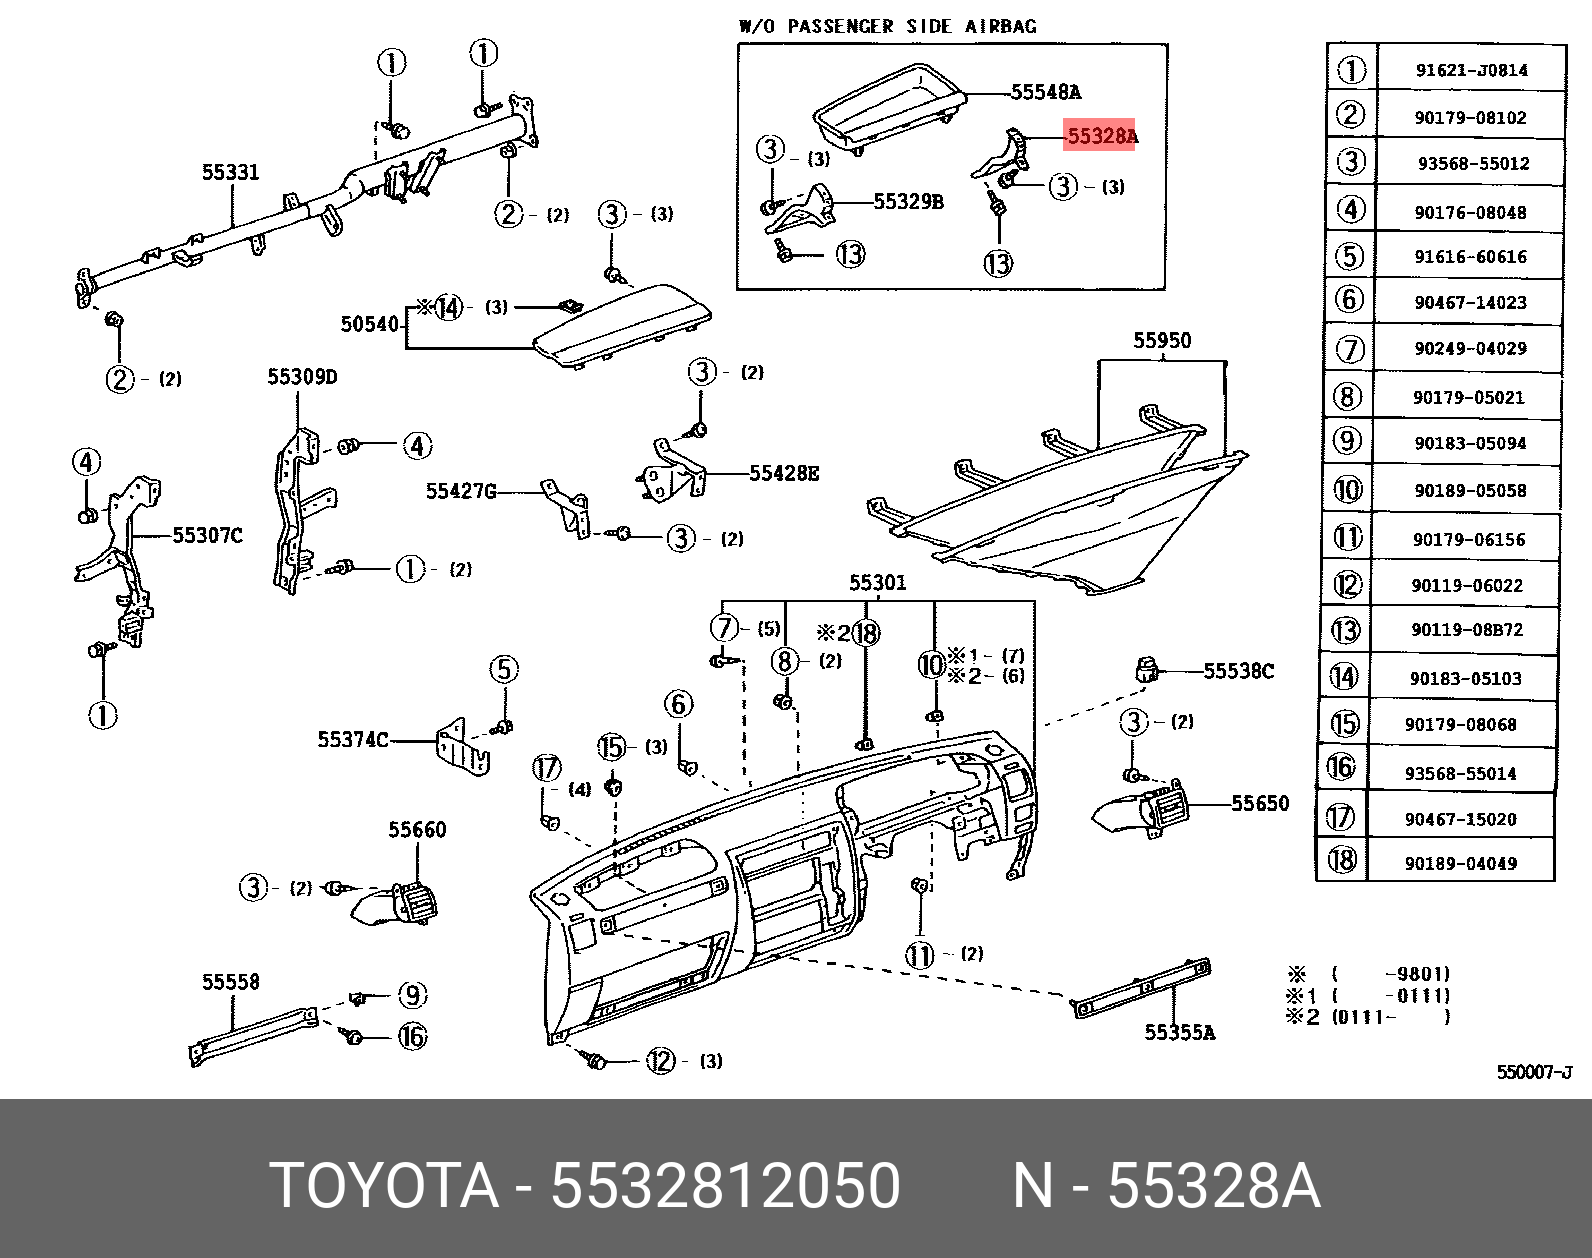 COROLLA LEVIN 198705 - 199106, STAY, INSTRUMENT PANEL, NO.3